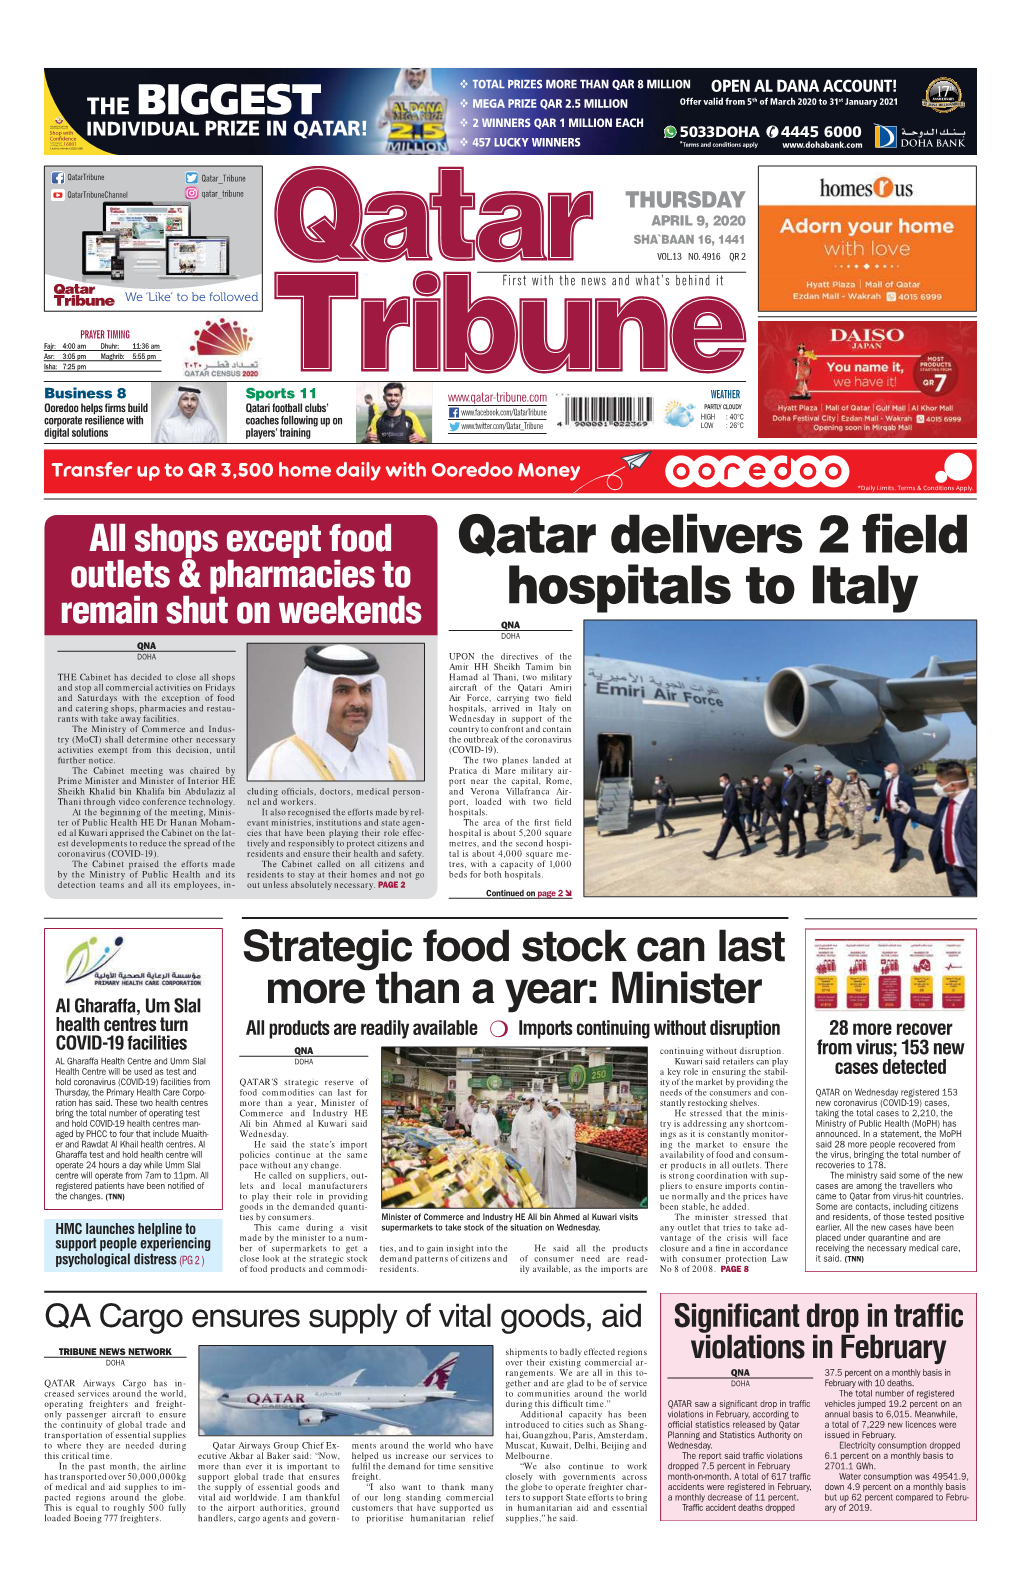 Qatar Delivers 2 Field Hospitals to Italy